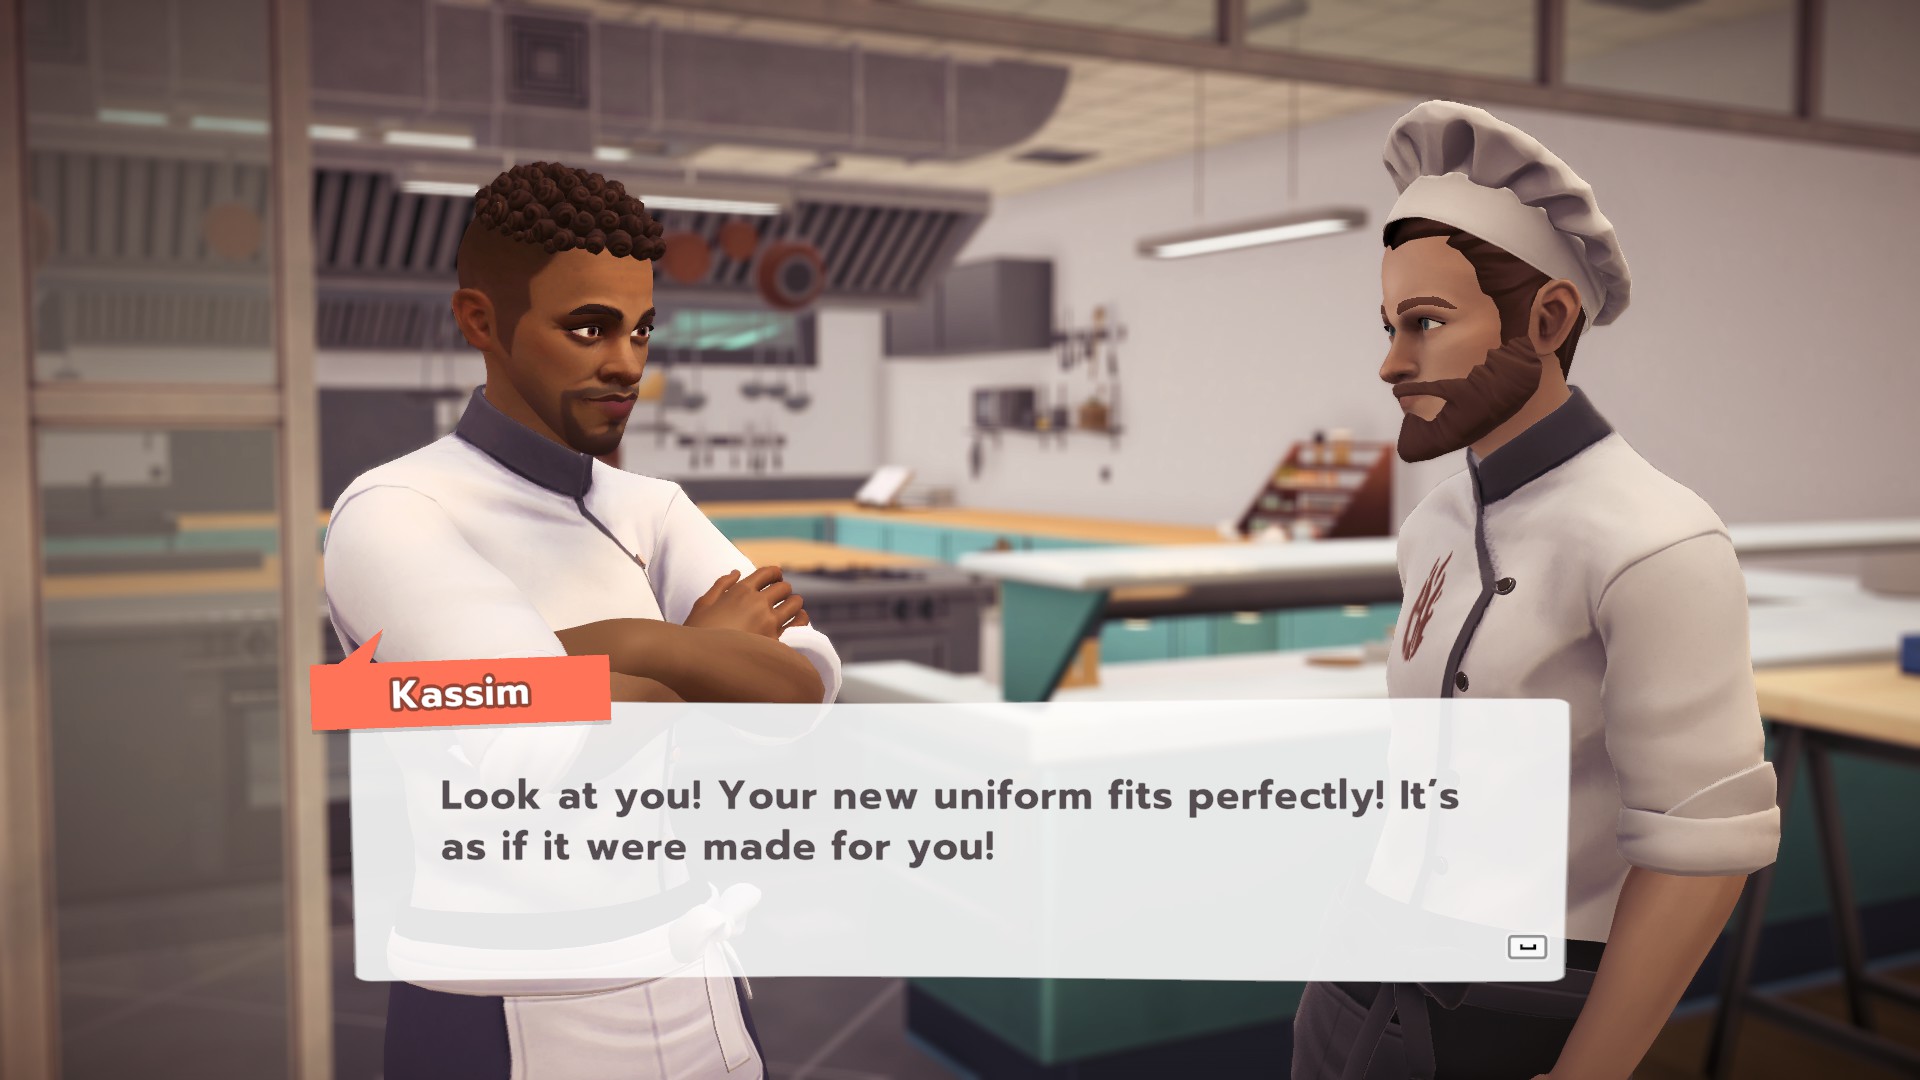 2 chefs and best friends proudly starting their path in Chef Life. Kassim is saying Look at you! your new uniform fits perfectly! It's as if it were made for you!